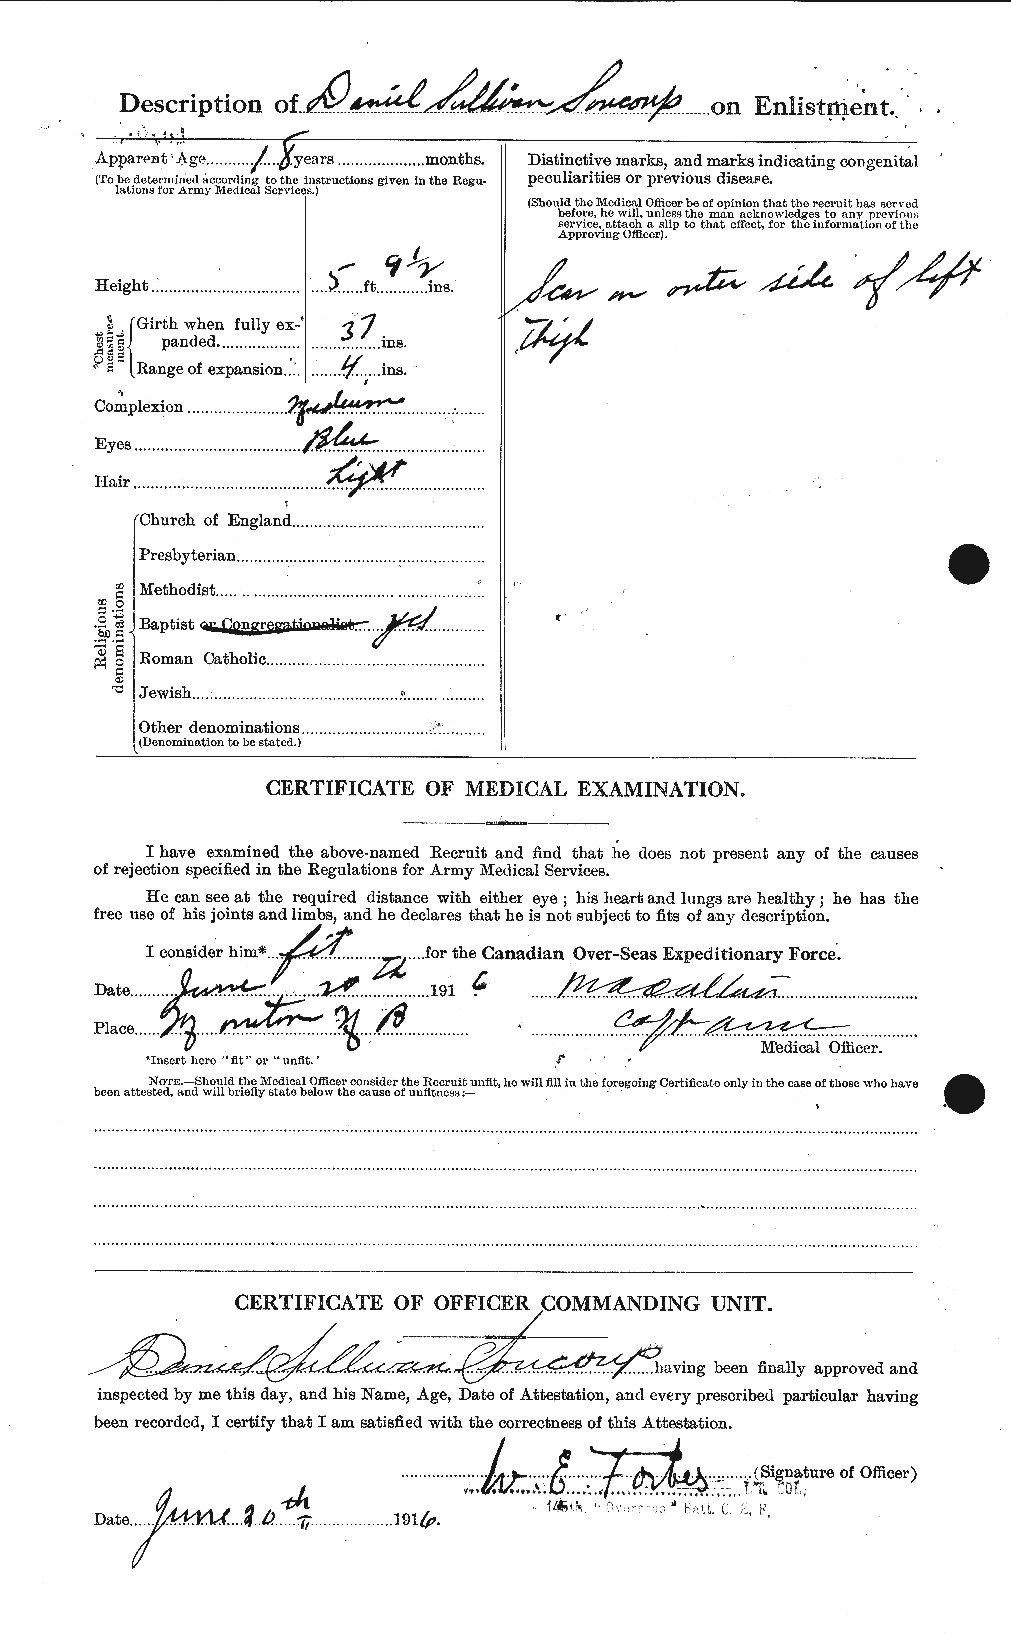 Personnel Records of the First World War - CEF 109588b